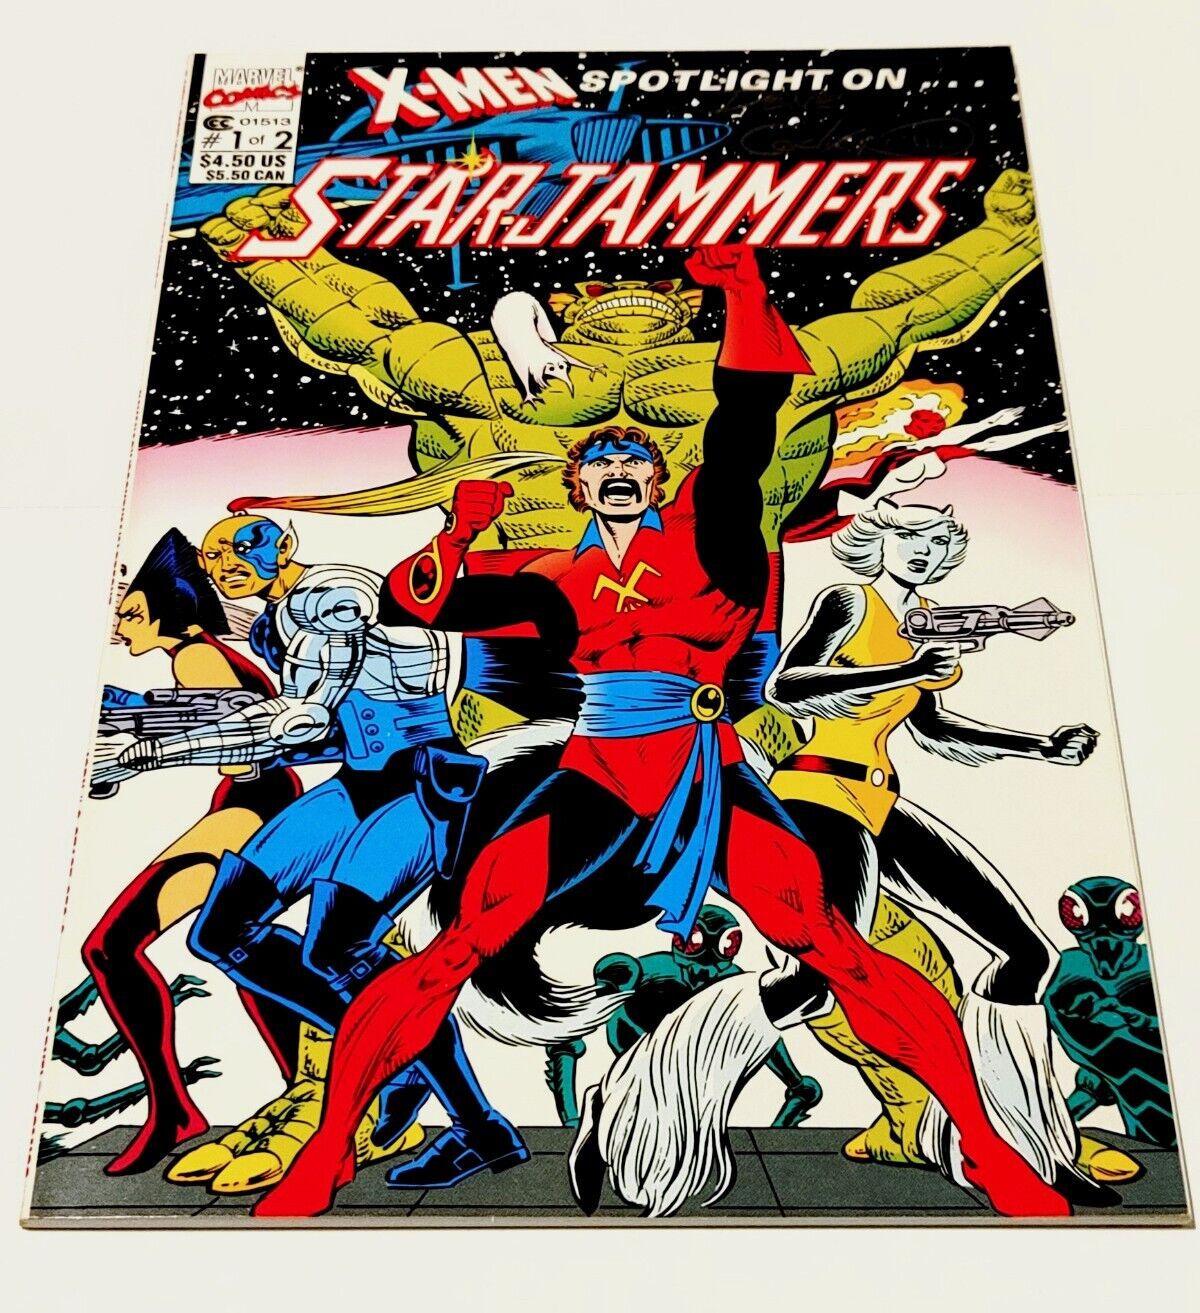 X-Men Spotlight on... Starjammers #1 Signed by Dave Cockrum (Marvel Comics 1990)